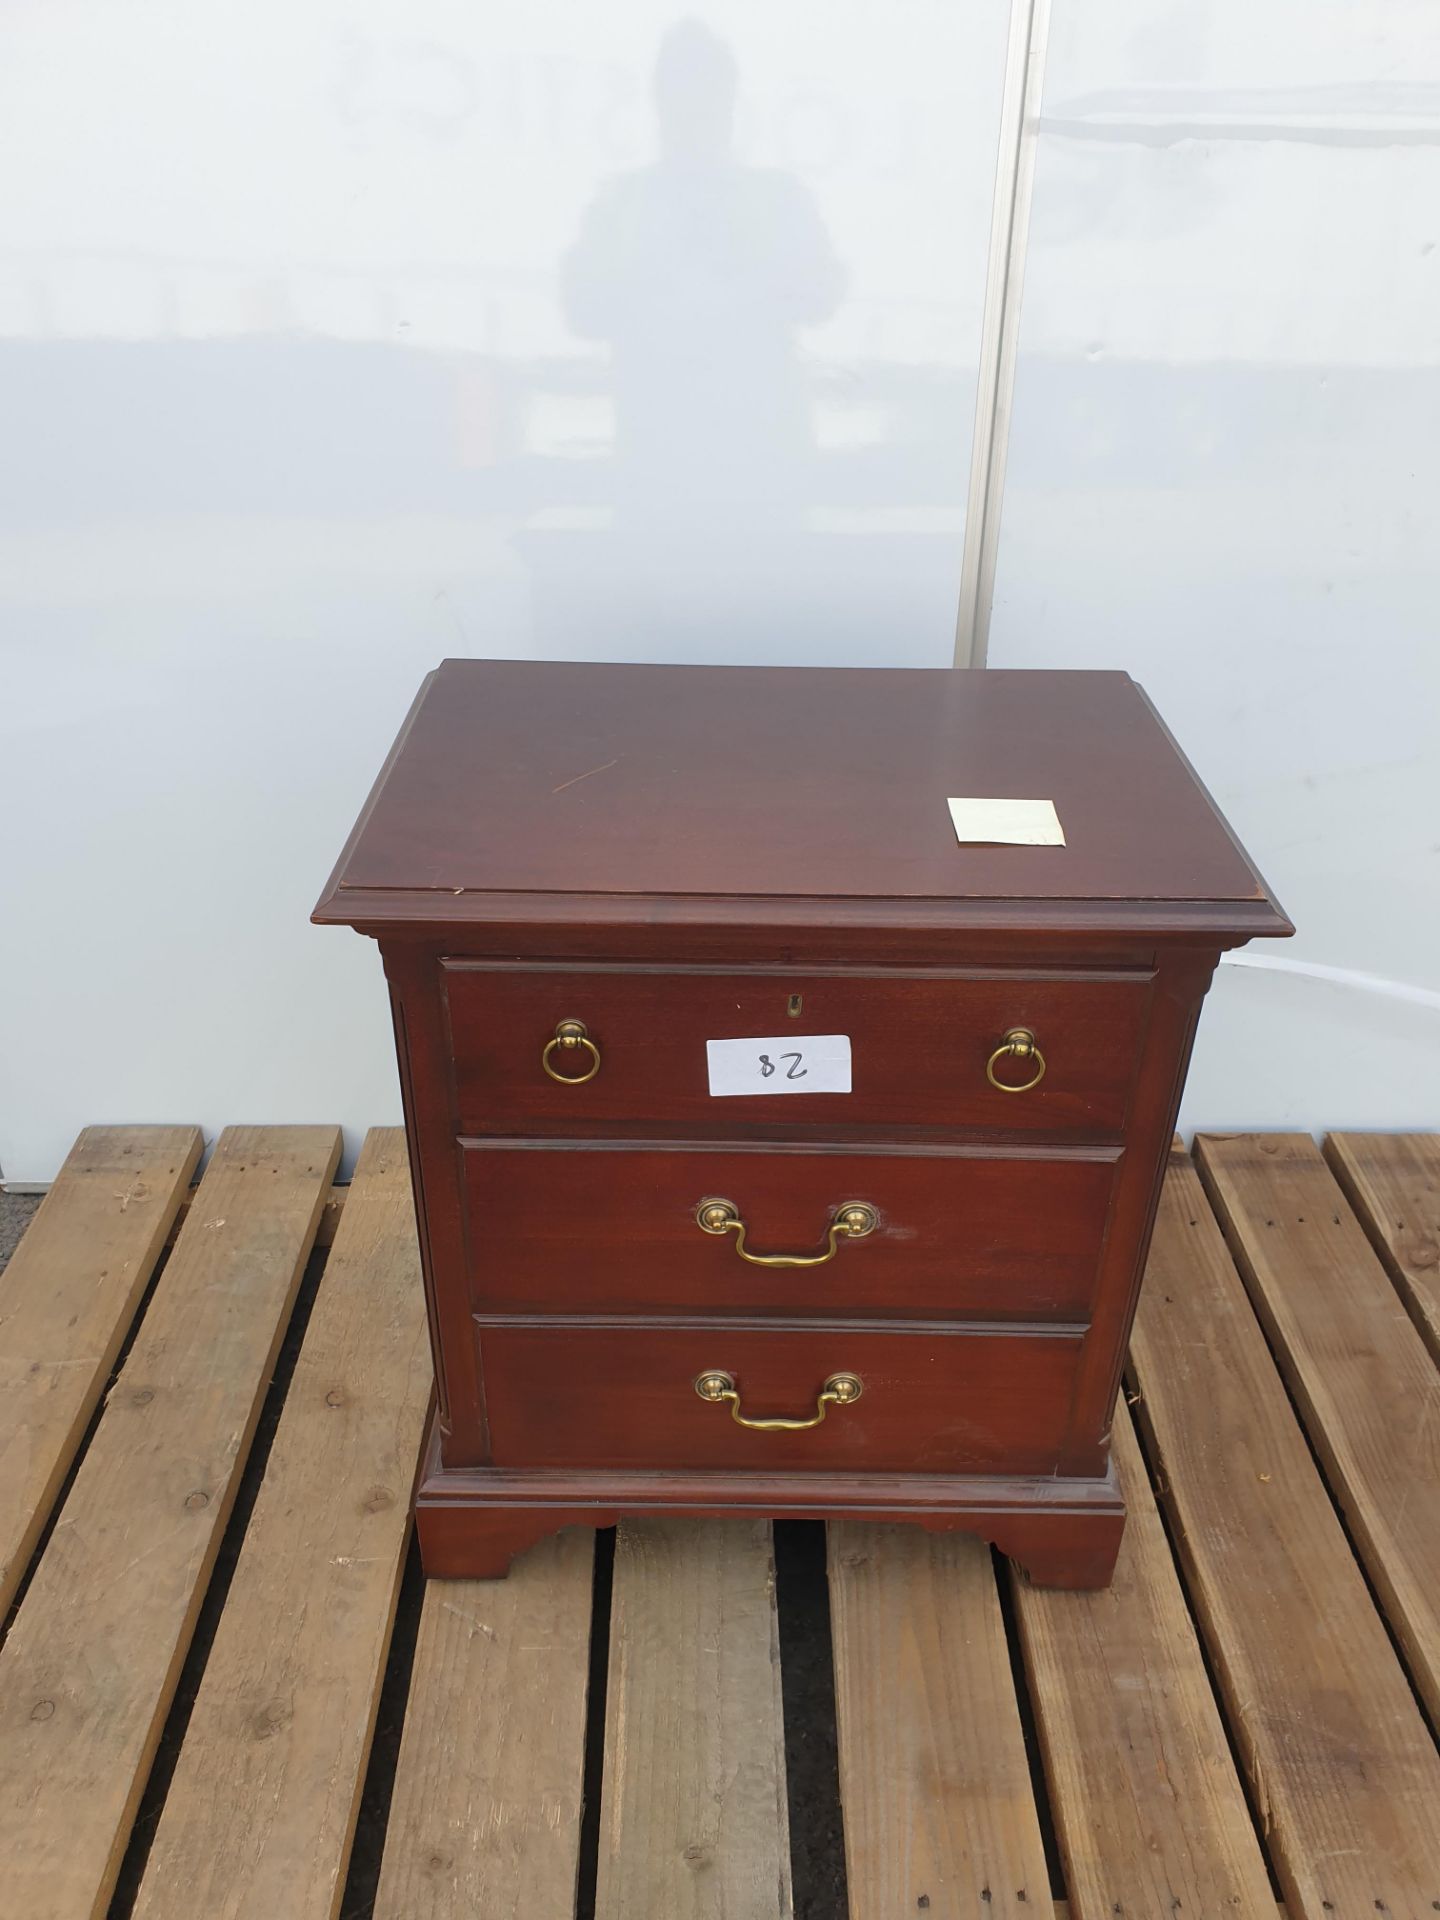 No VAT Cherrywood Two Drawer Cabinet - Image 2 of 2